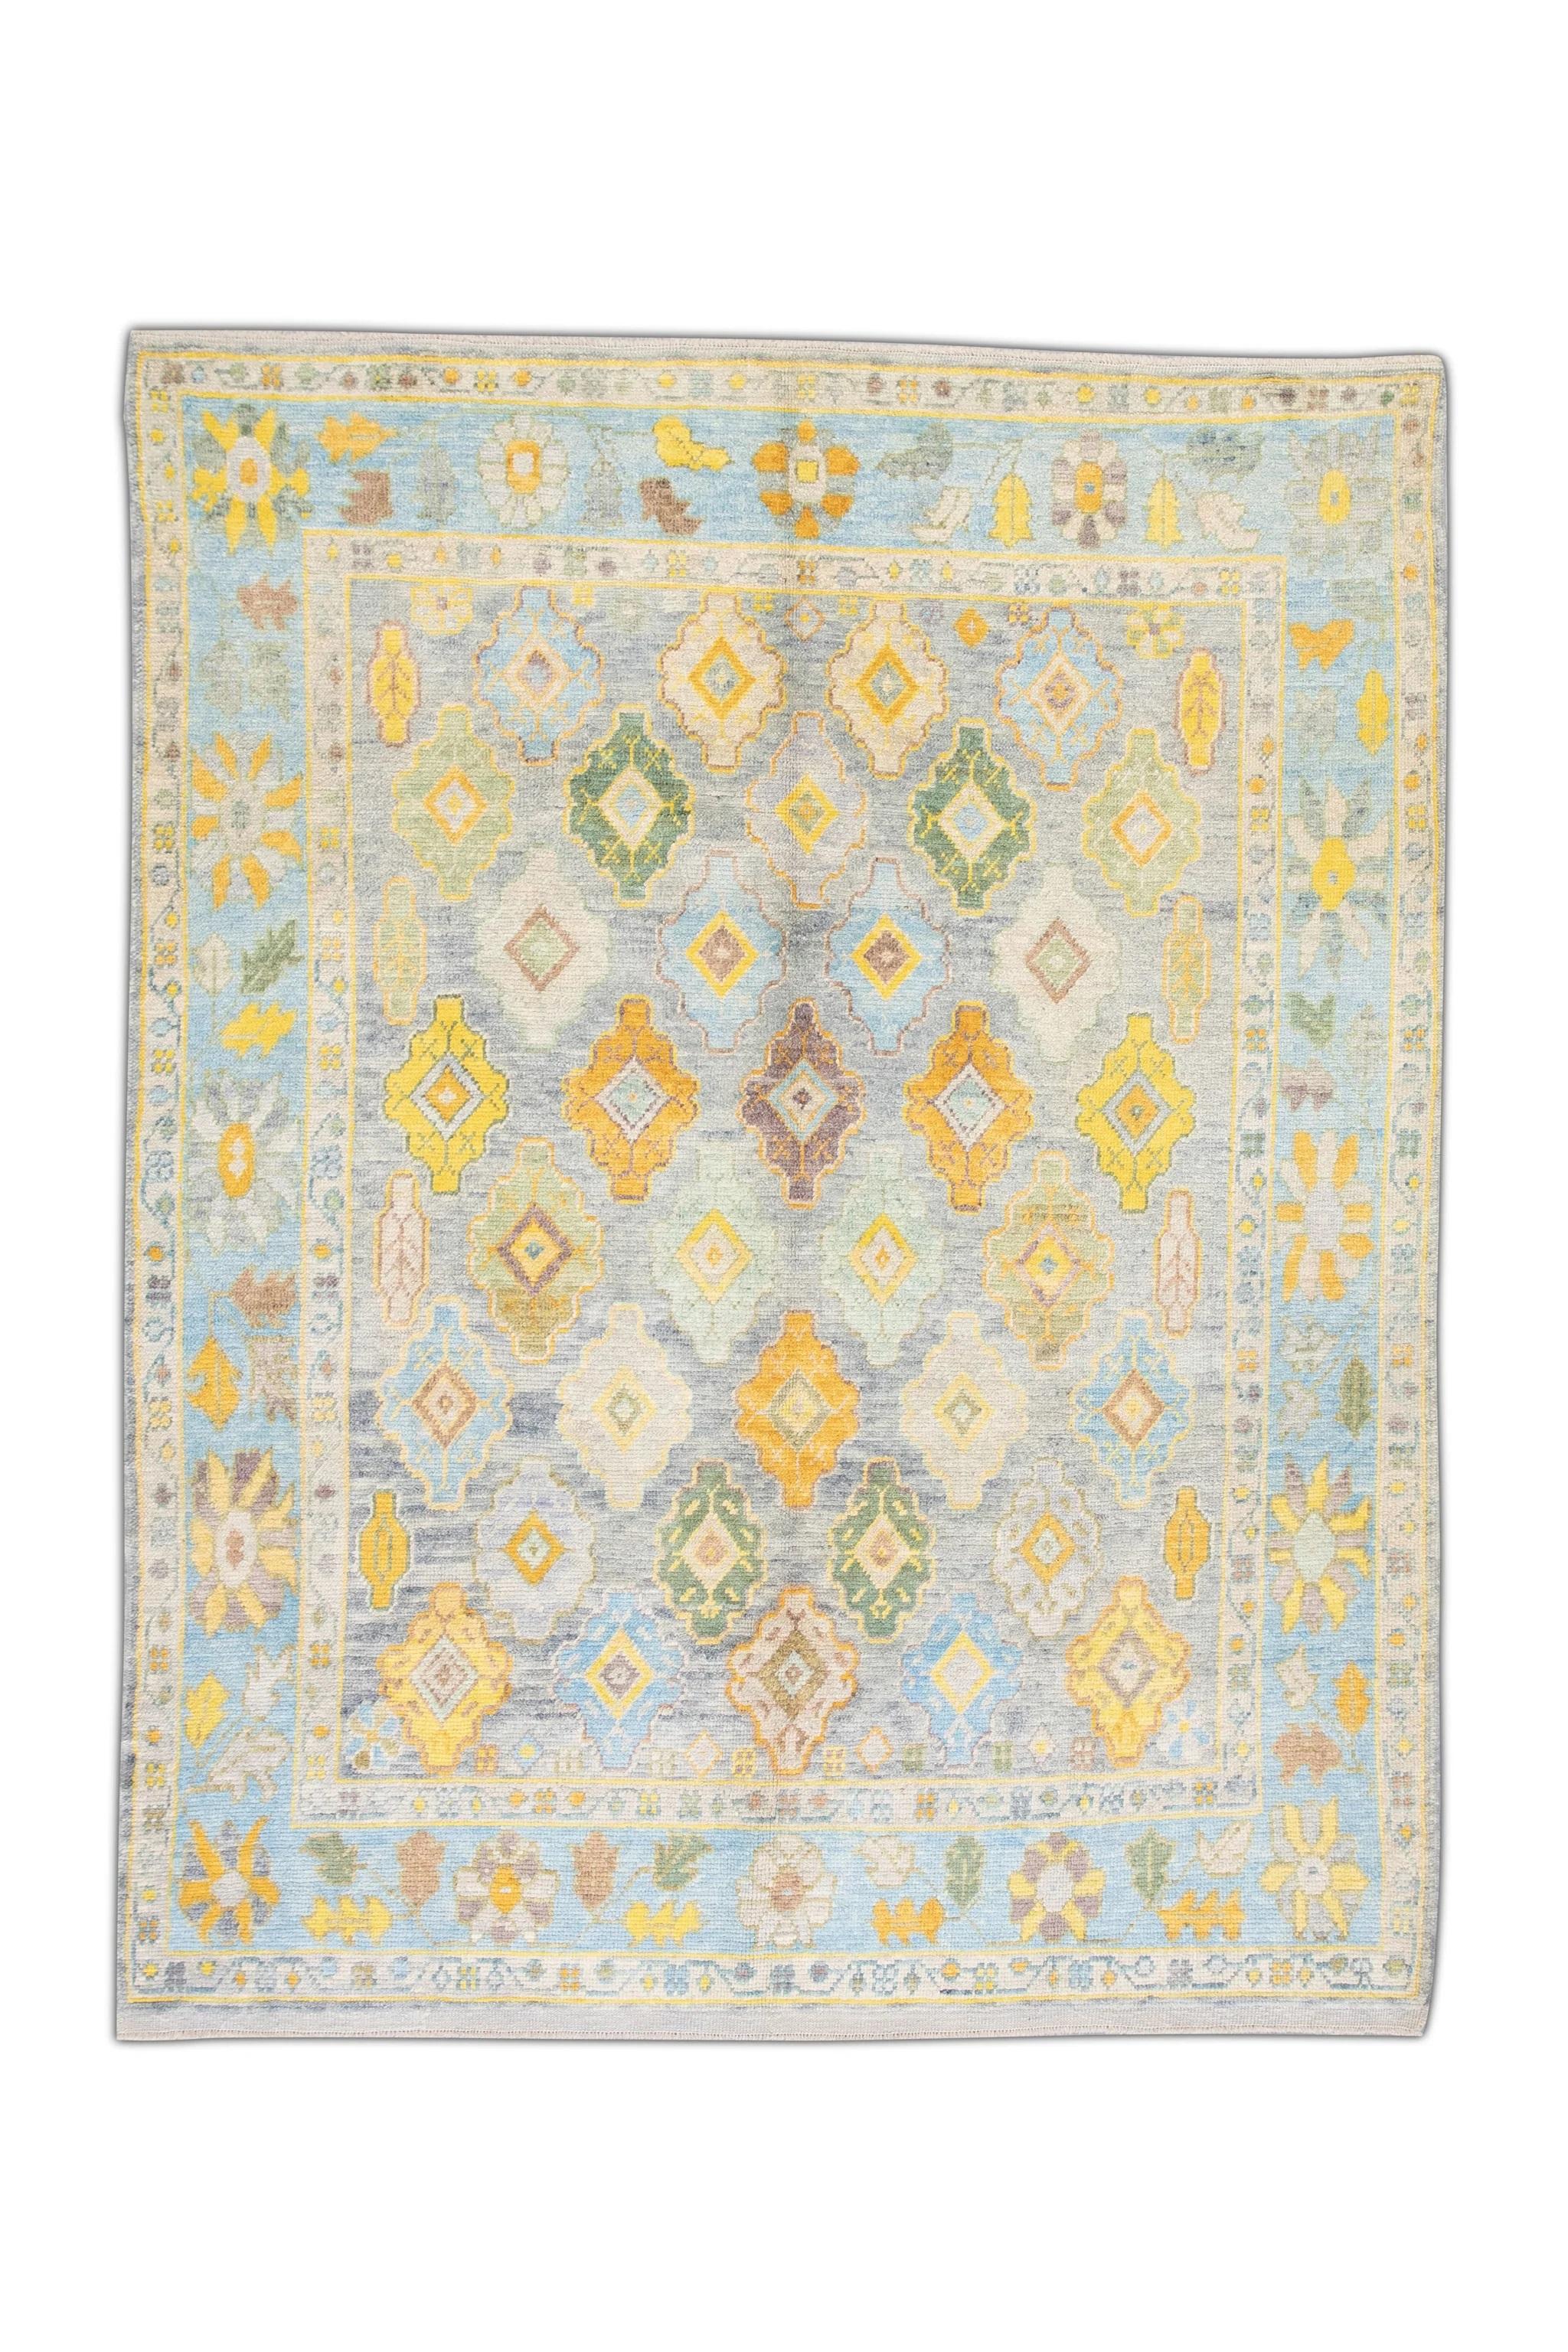 Handwoven Wool Floral Turkish Oushak Rug in Blue, Green, and Yellow 8'1